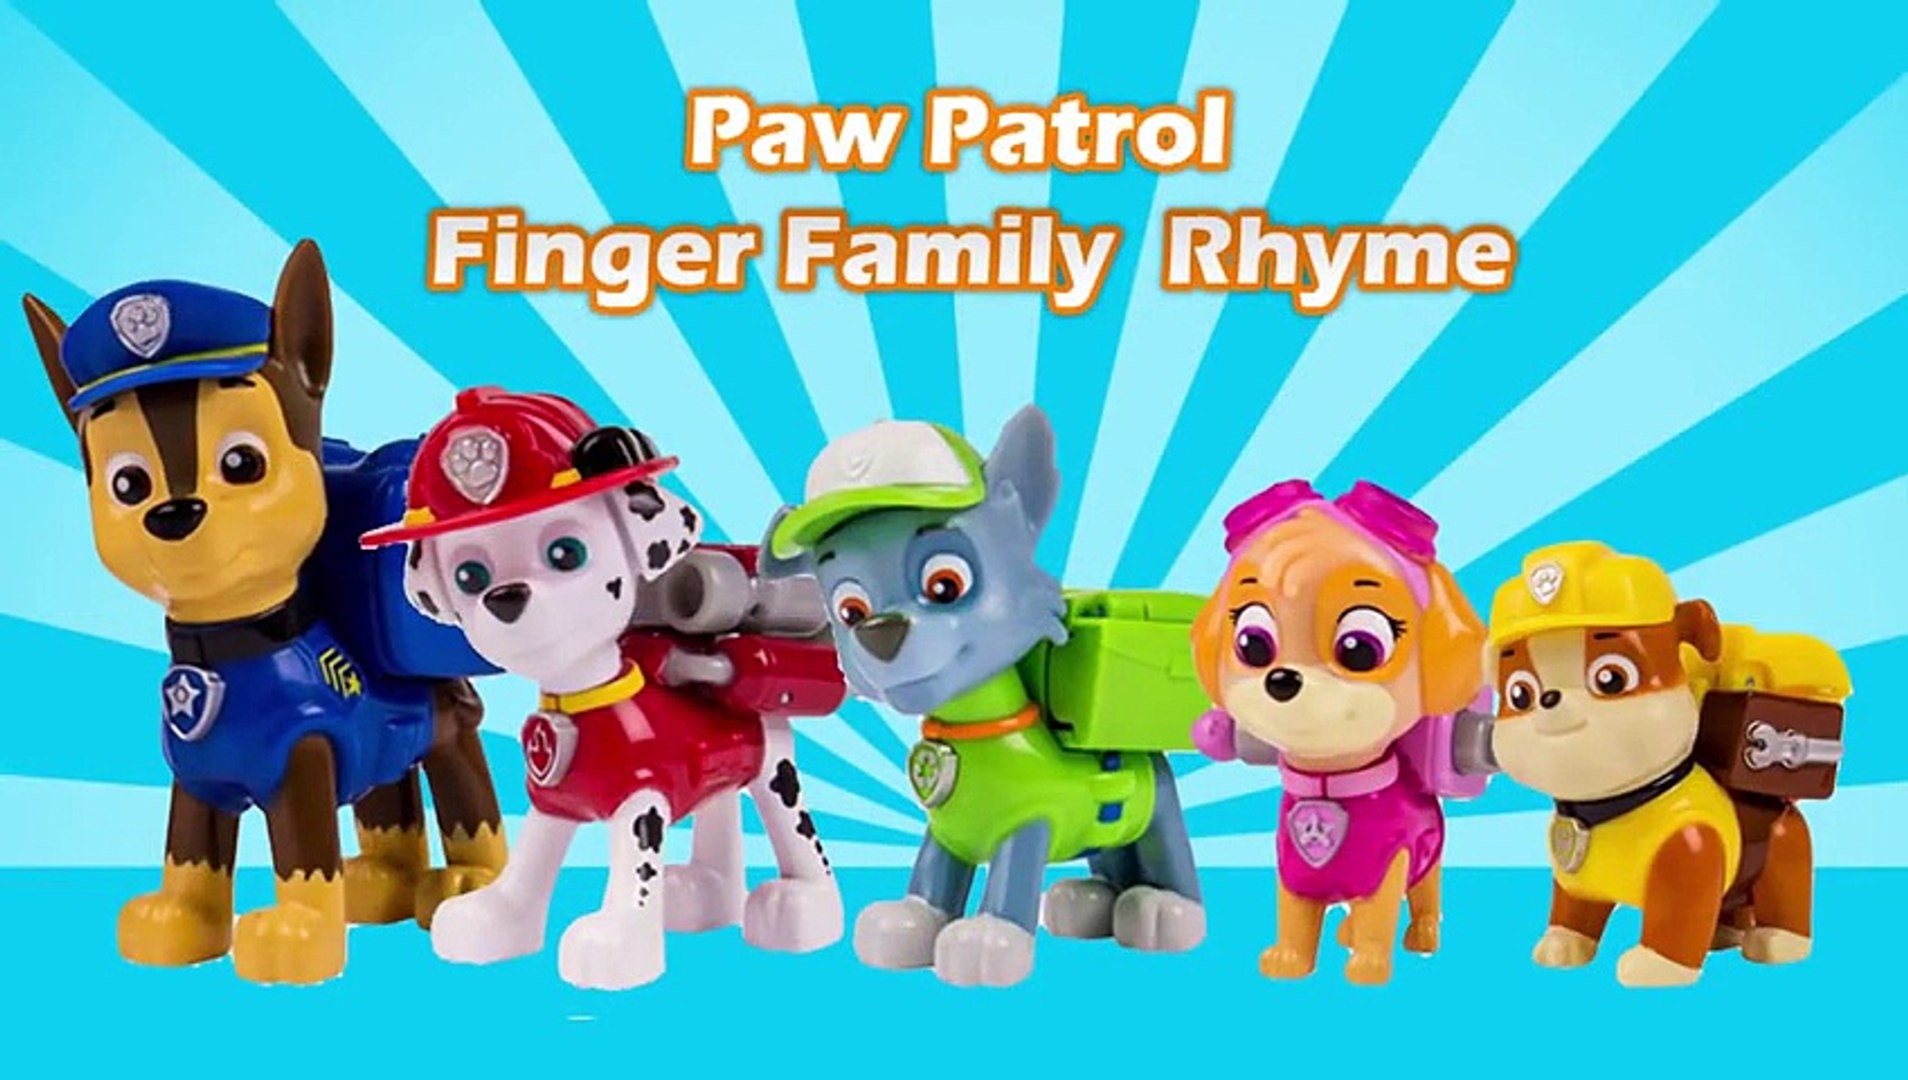 Paw Patrol Finger Family Songs, Nick Jr. - Daddy Finger Nursery Rhymes  Collection 30 minut - Dailymotion Video